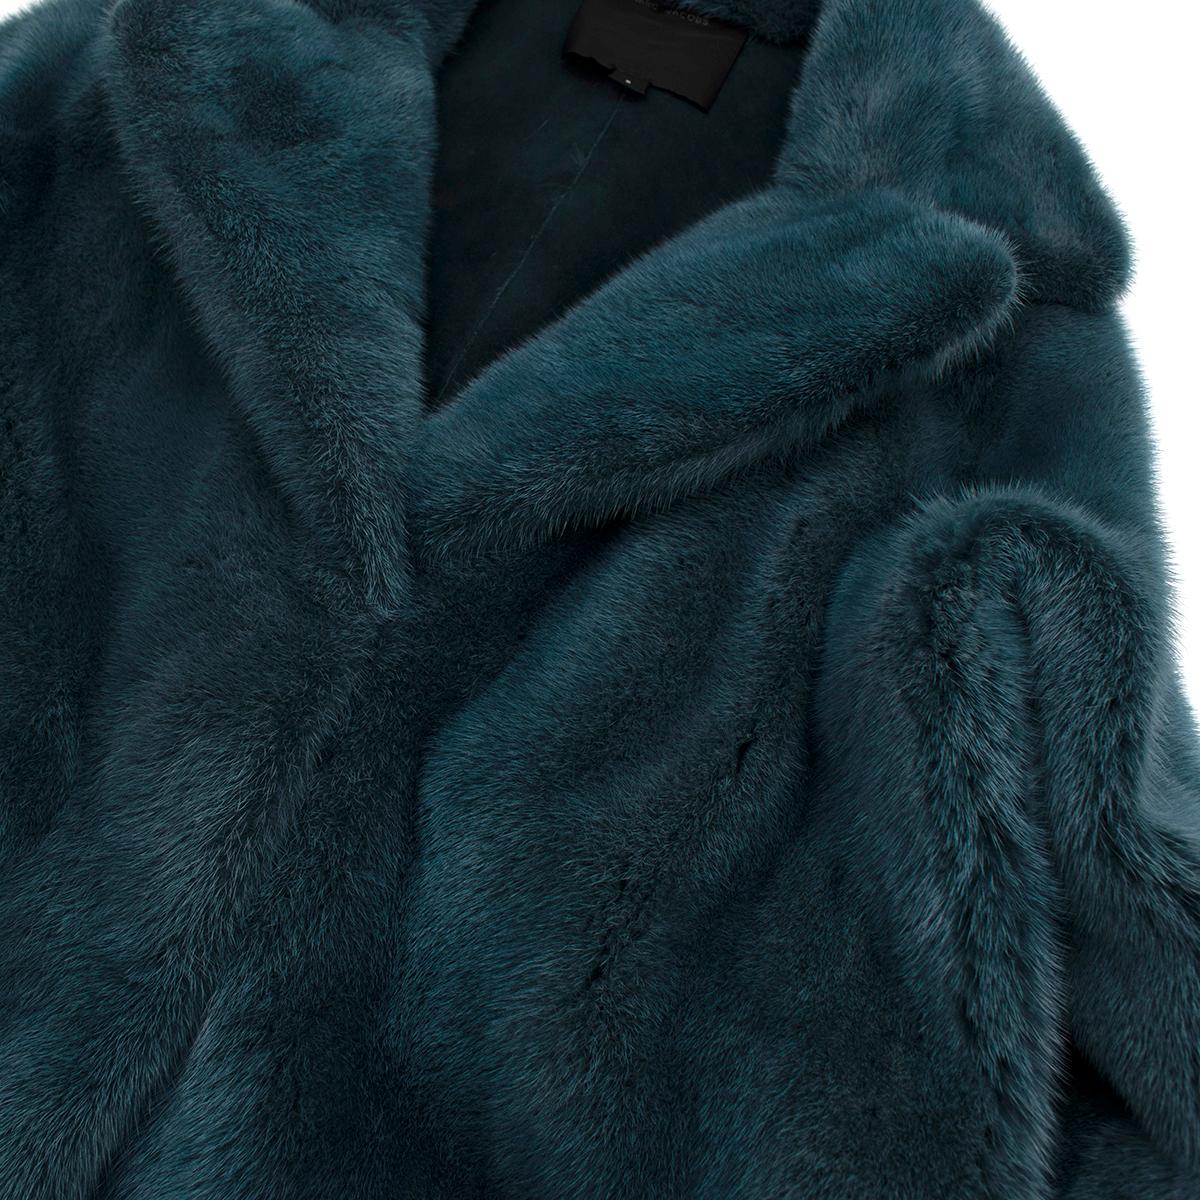 Marc Jacobs Blue Mink Fur Coat - Size 6/S In Excellent Condition For Sale In London, GB